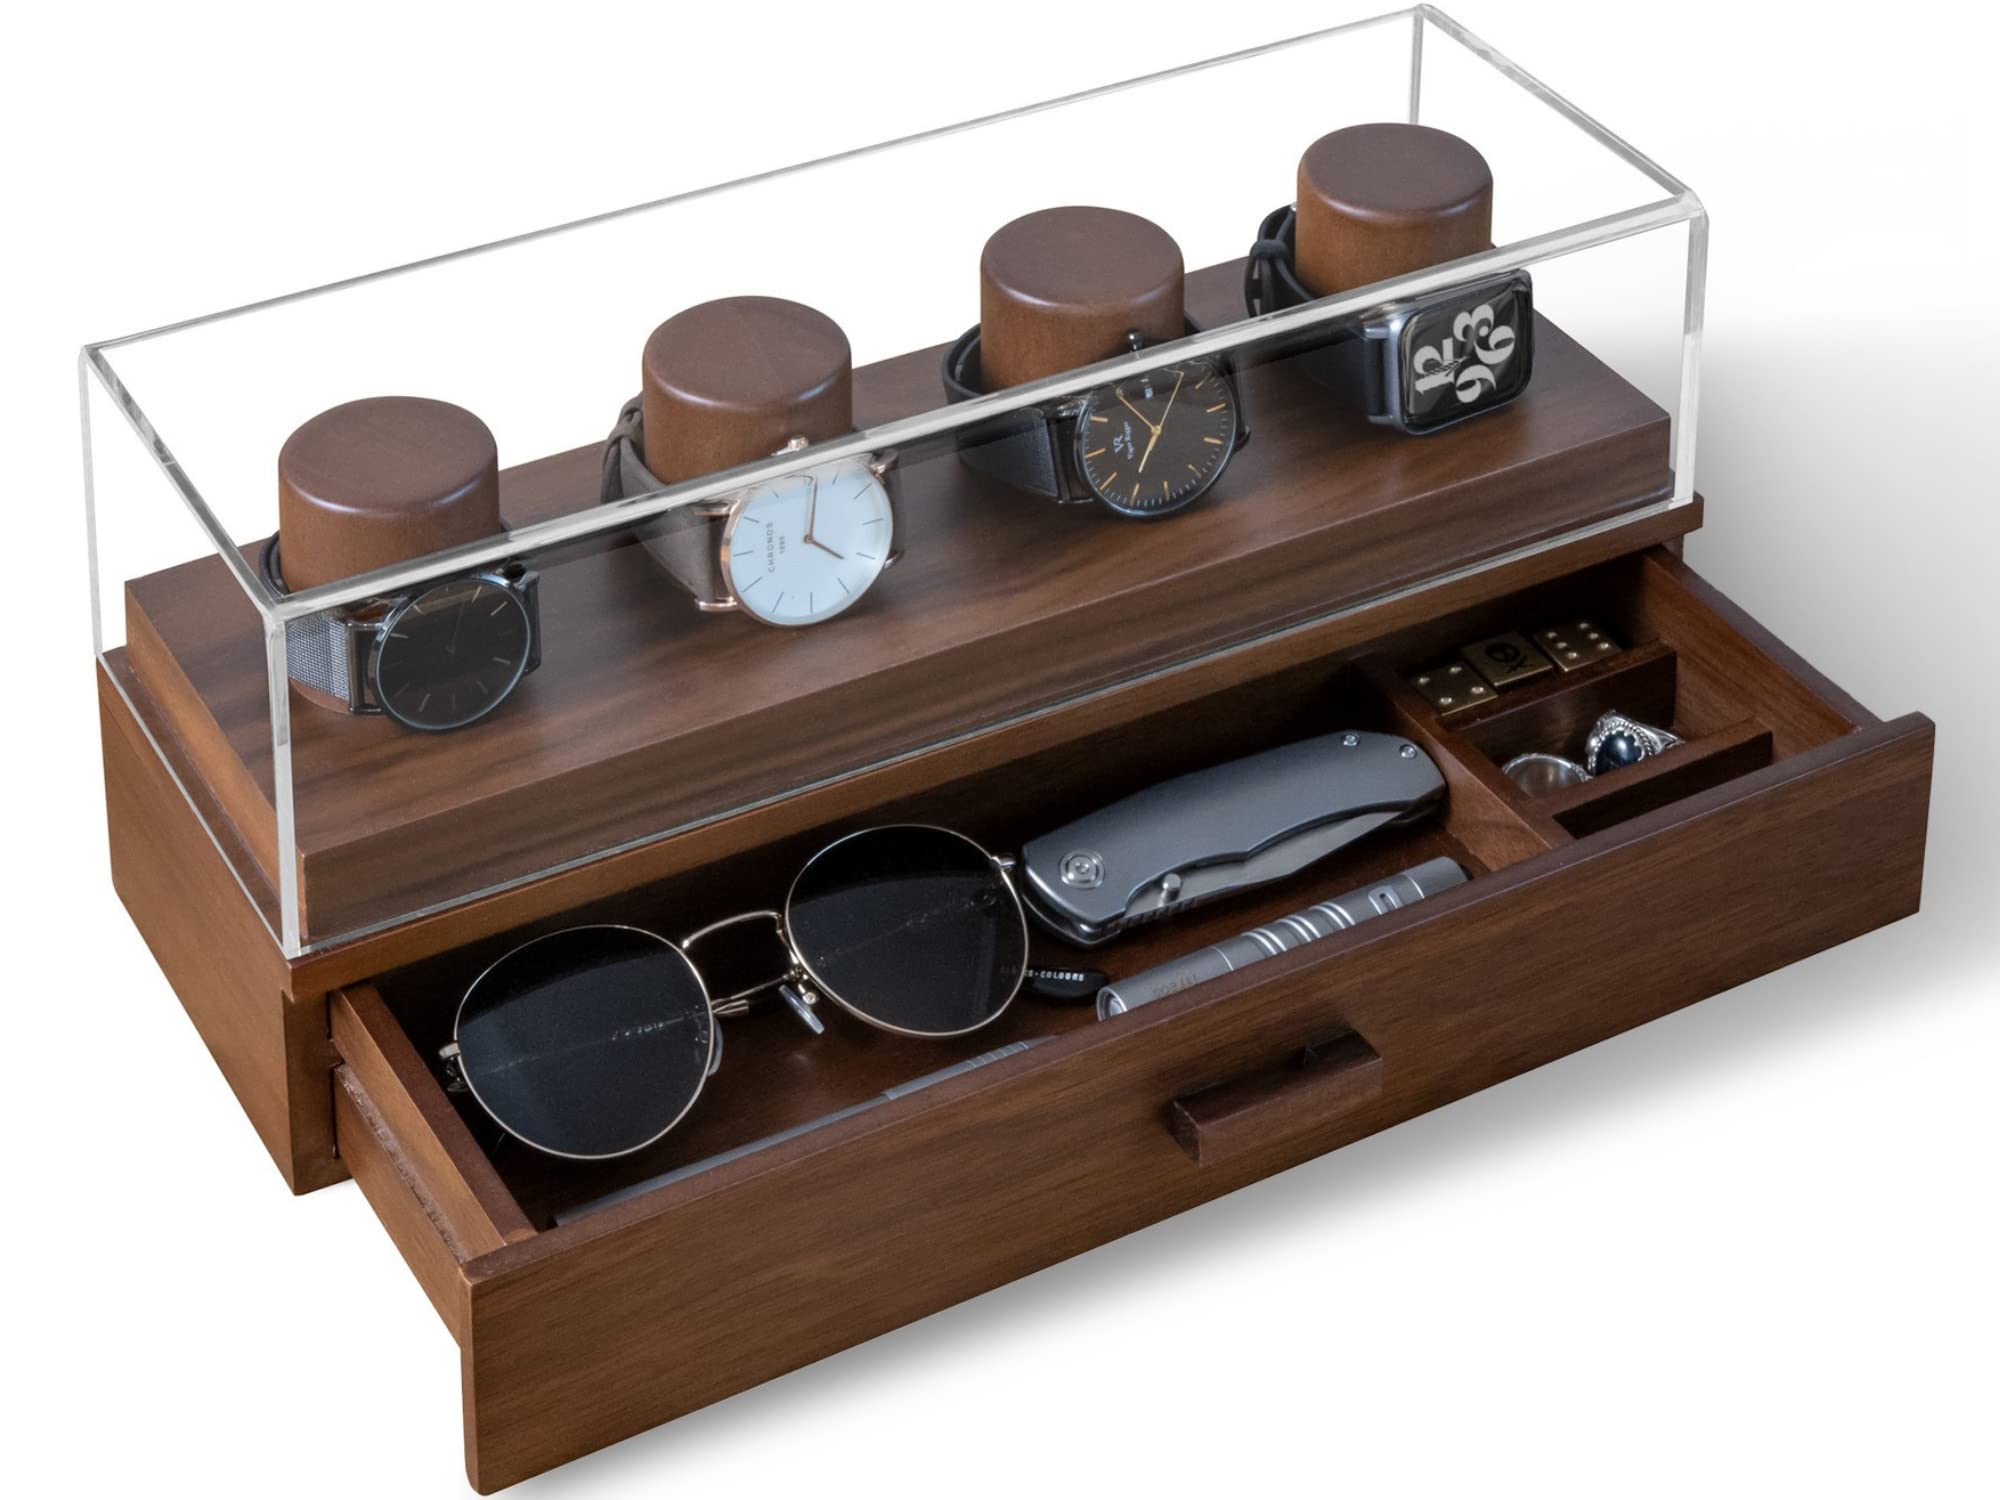 Watch Display Case with Rustic Brown Vegan Leather Padding for Protection - Sleek Walnut Wood Watch Holder to Show Off Watches - Watch Box for Men - Watch Display Case for Men - Mens Watch Case